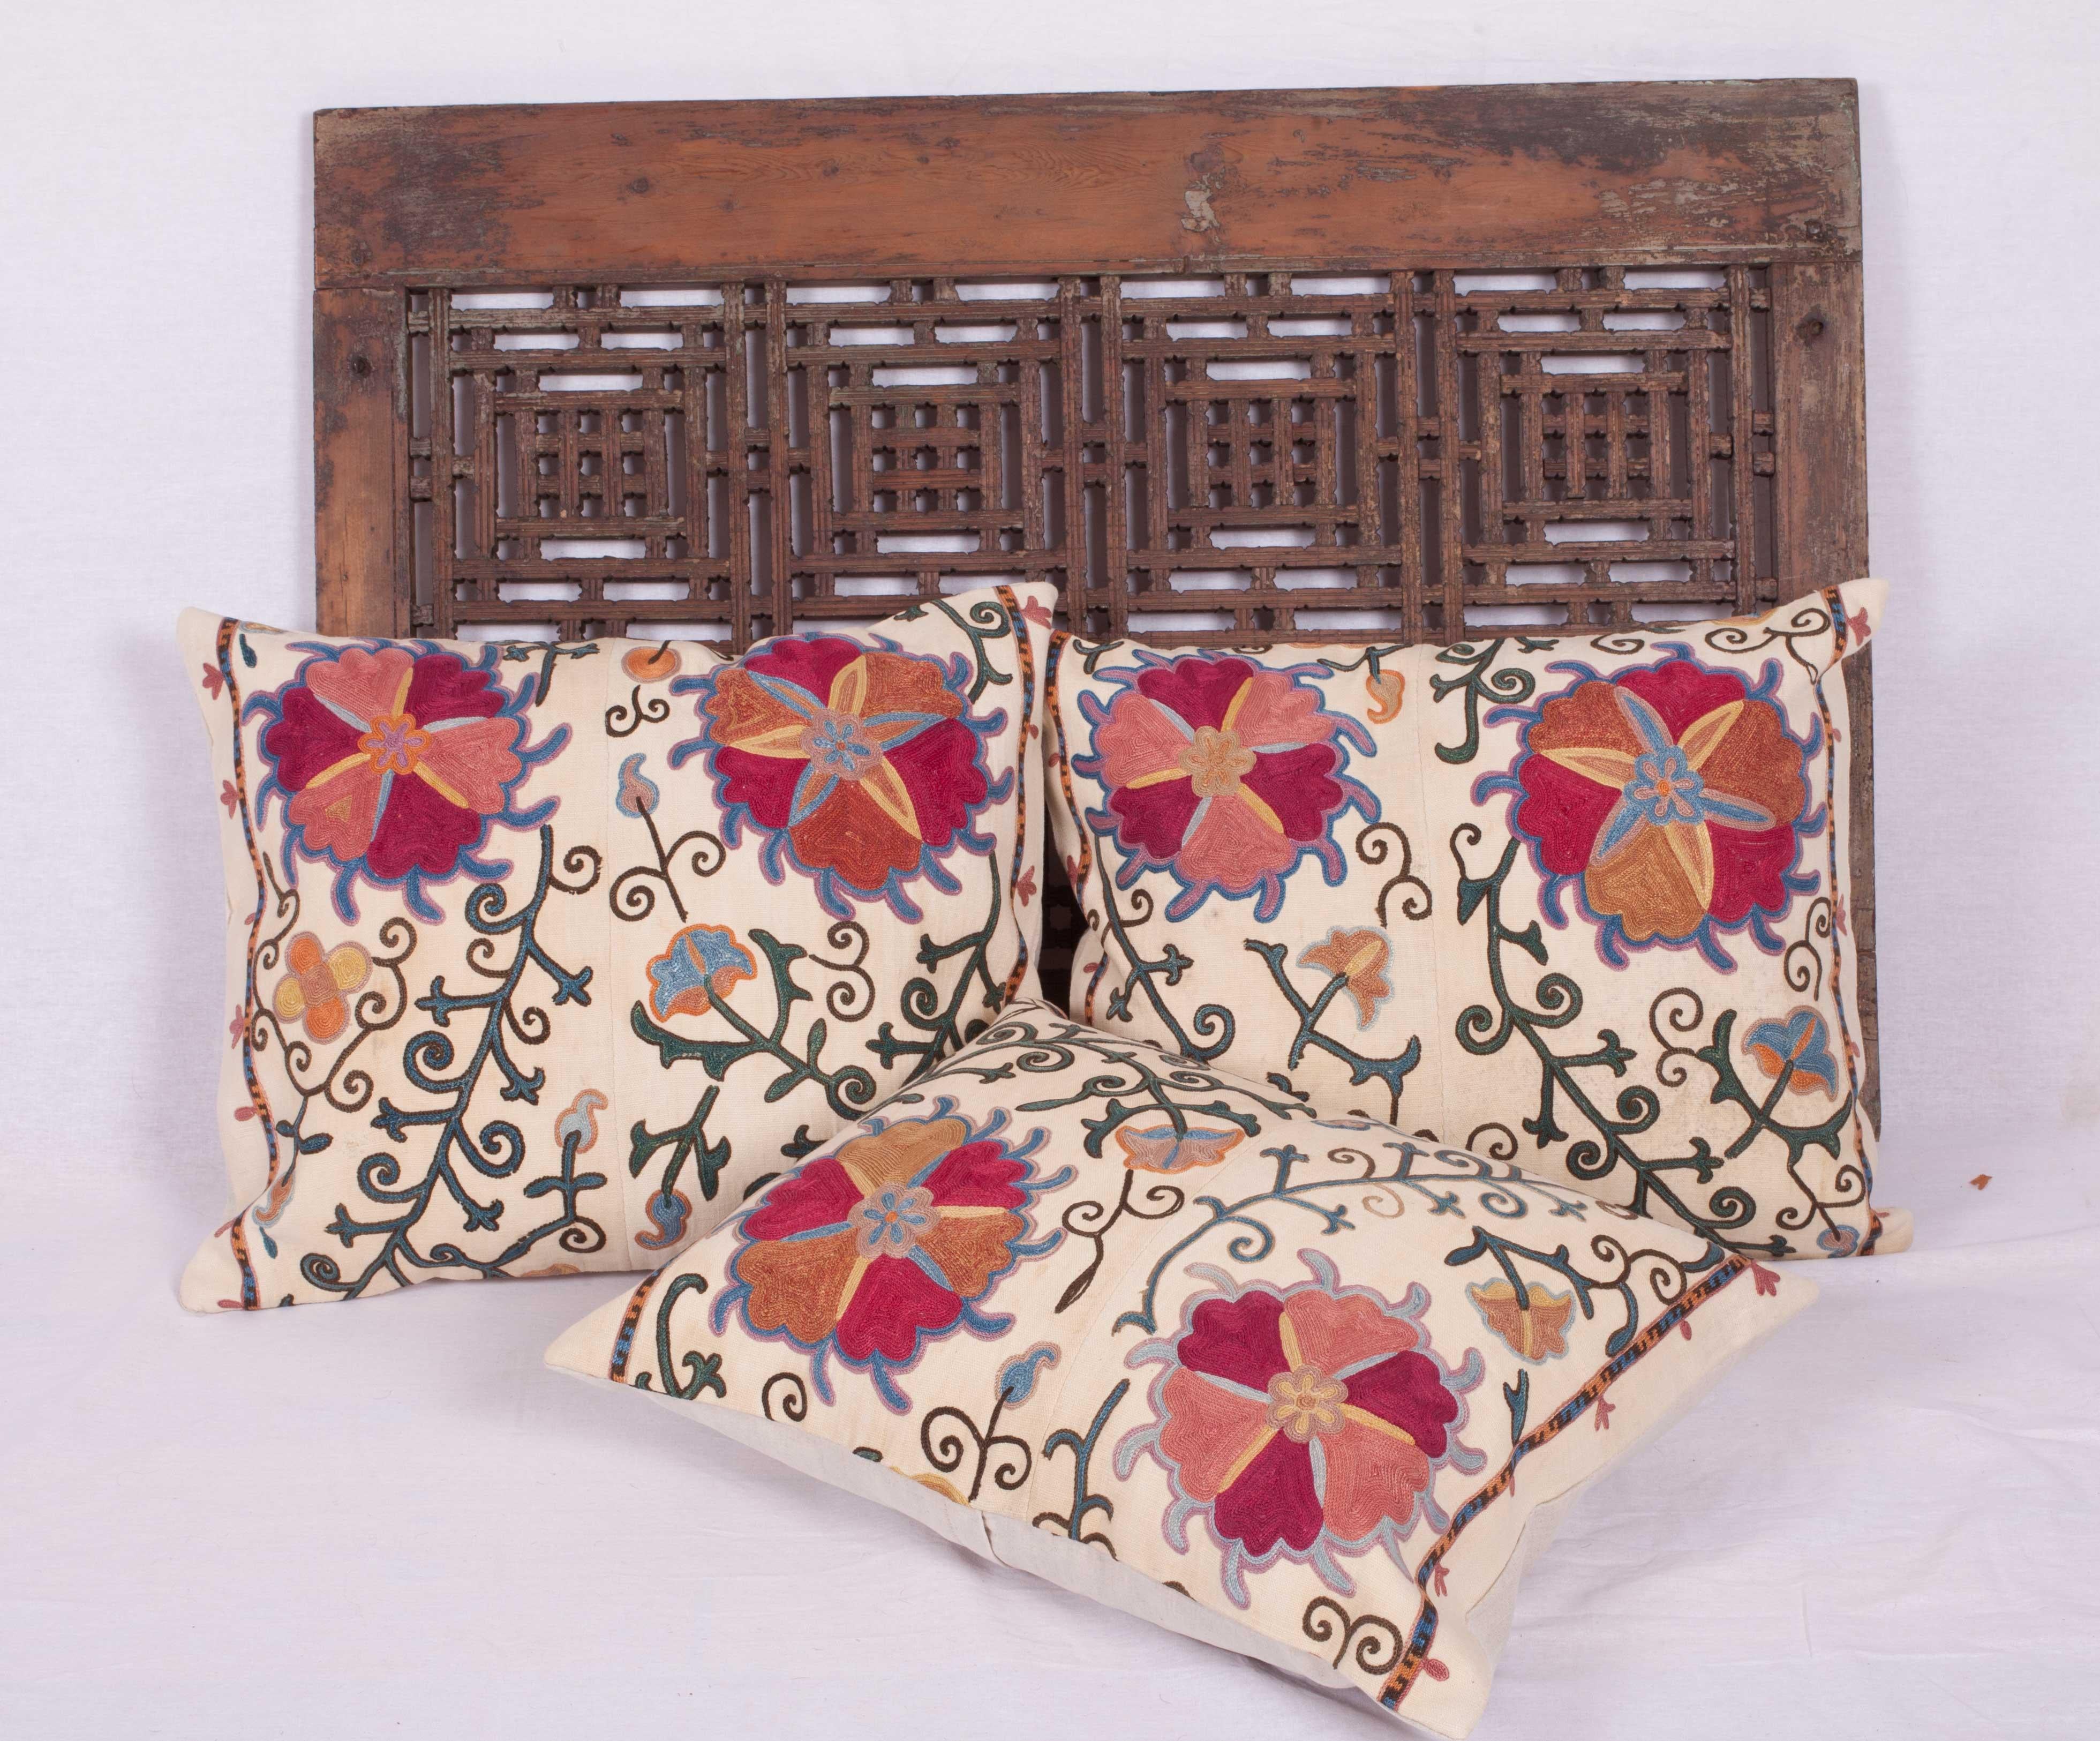 Embroidered Antique Suzani Pillow Cases Fashioned from a 19th Century Uzbek Bukhara Suzani